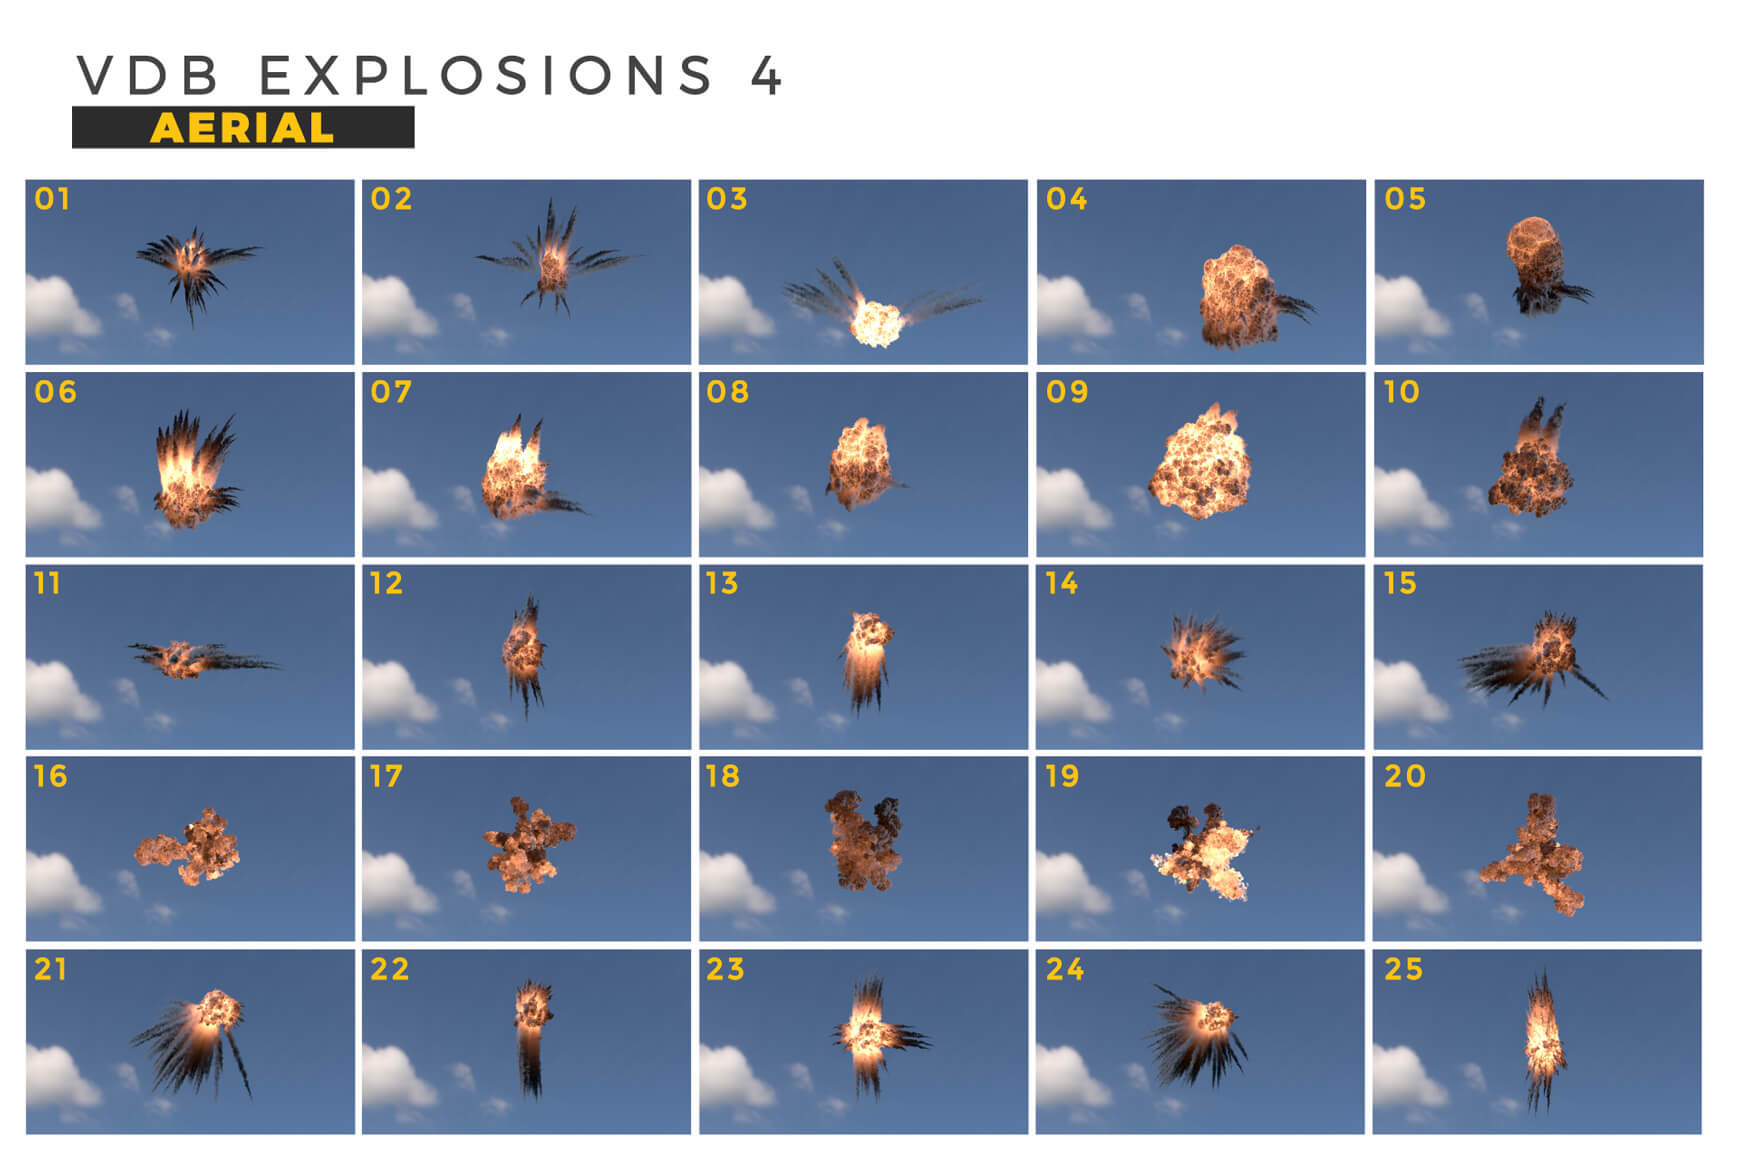 VDB Explosions 4 Aerial Quick Lookup Guide Thumbnails